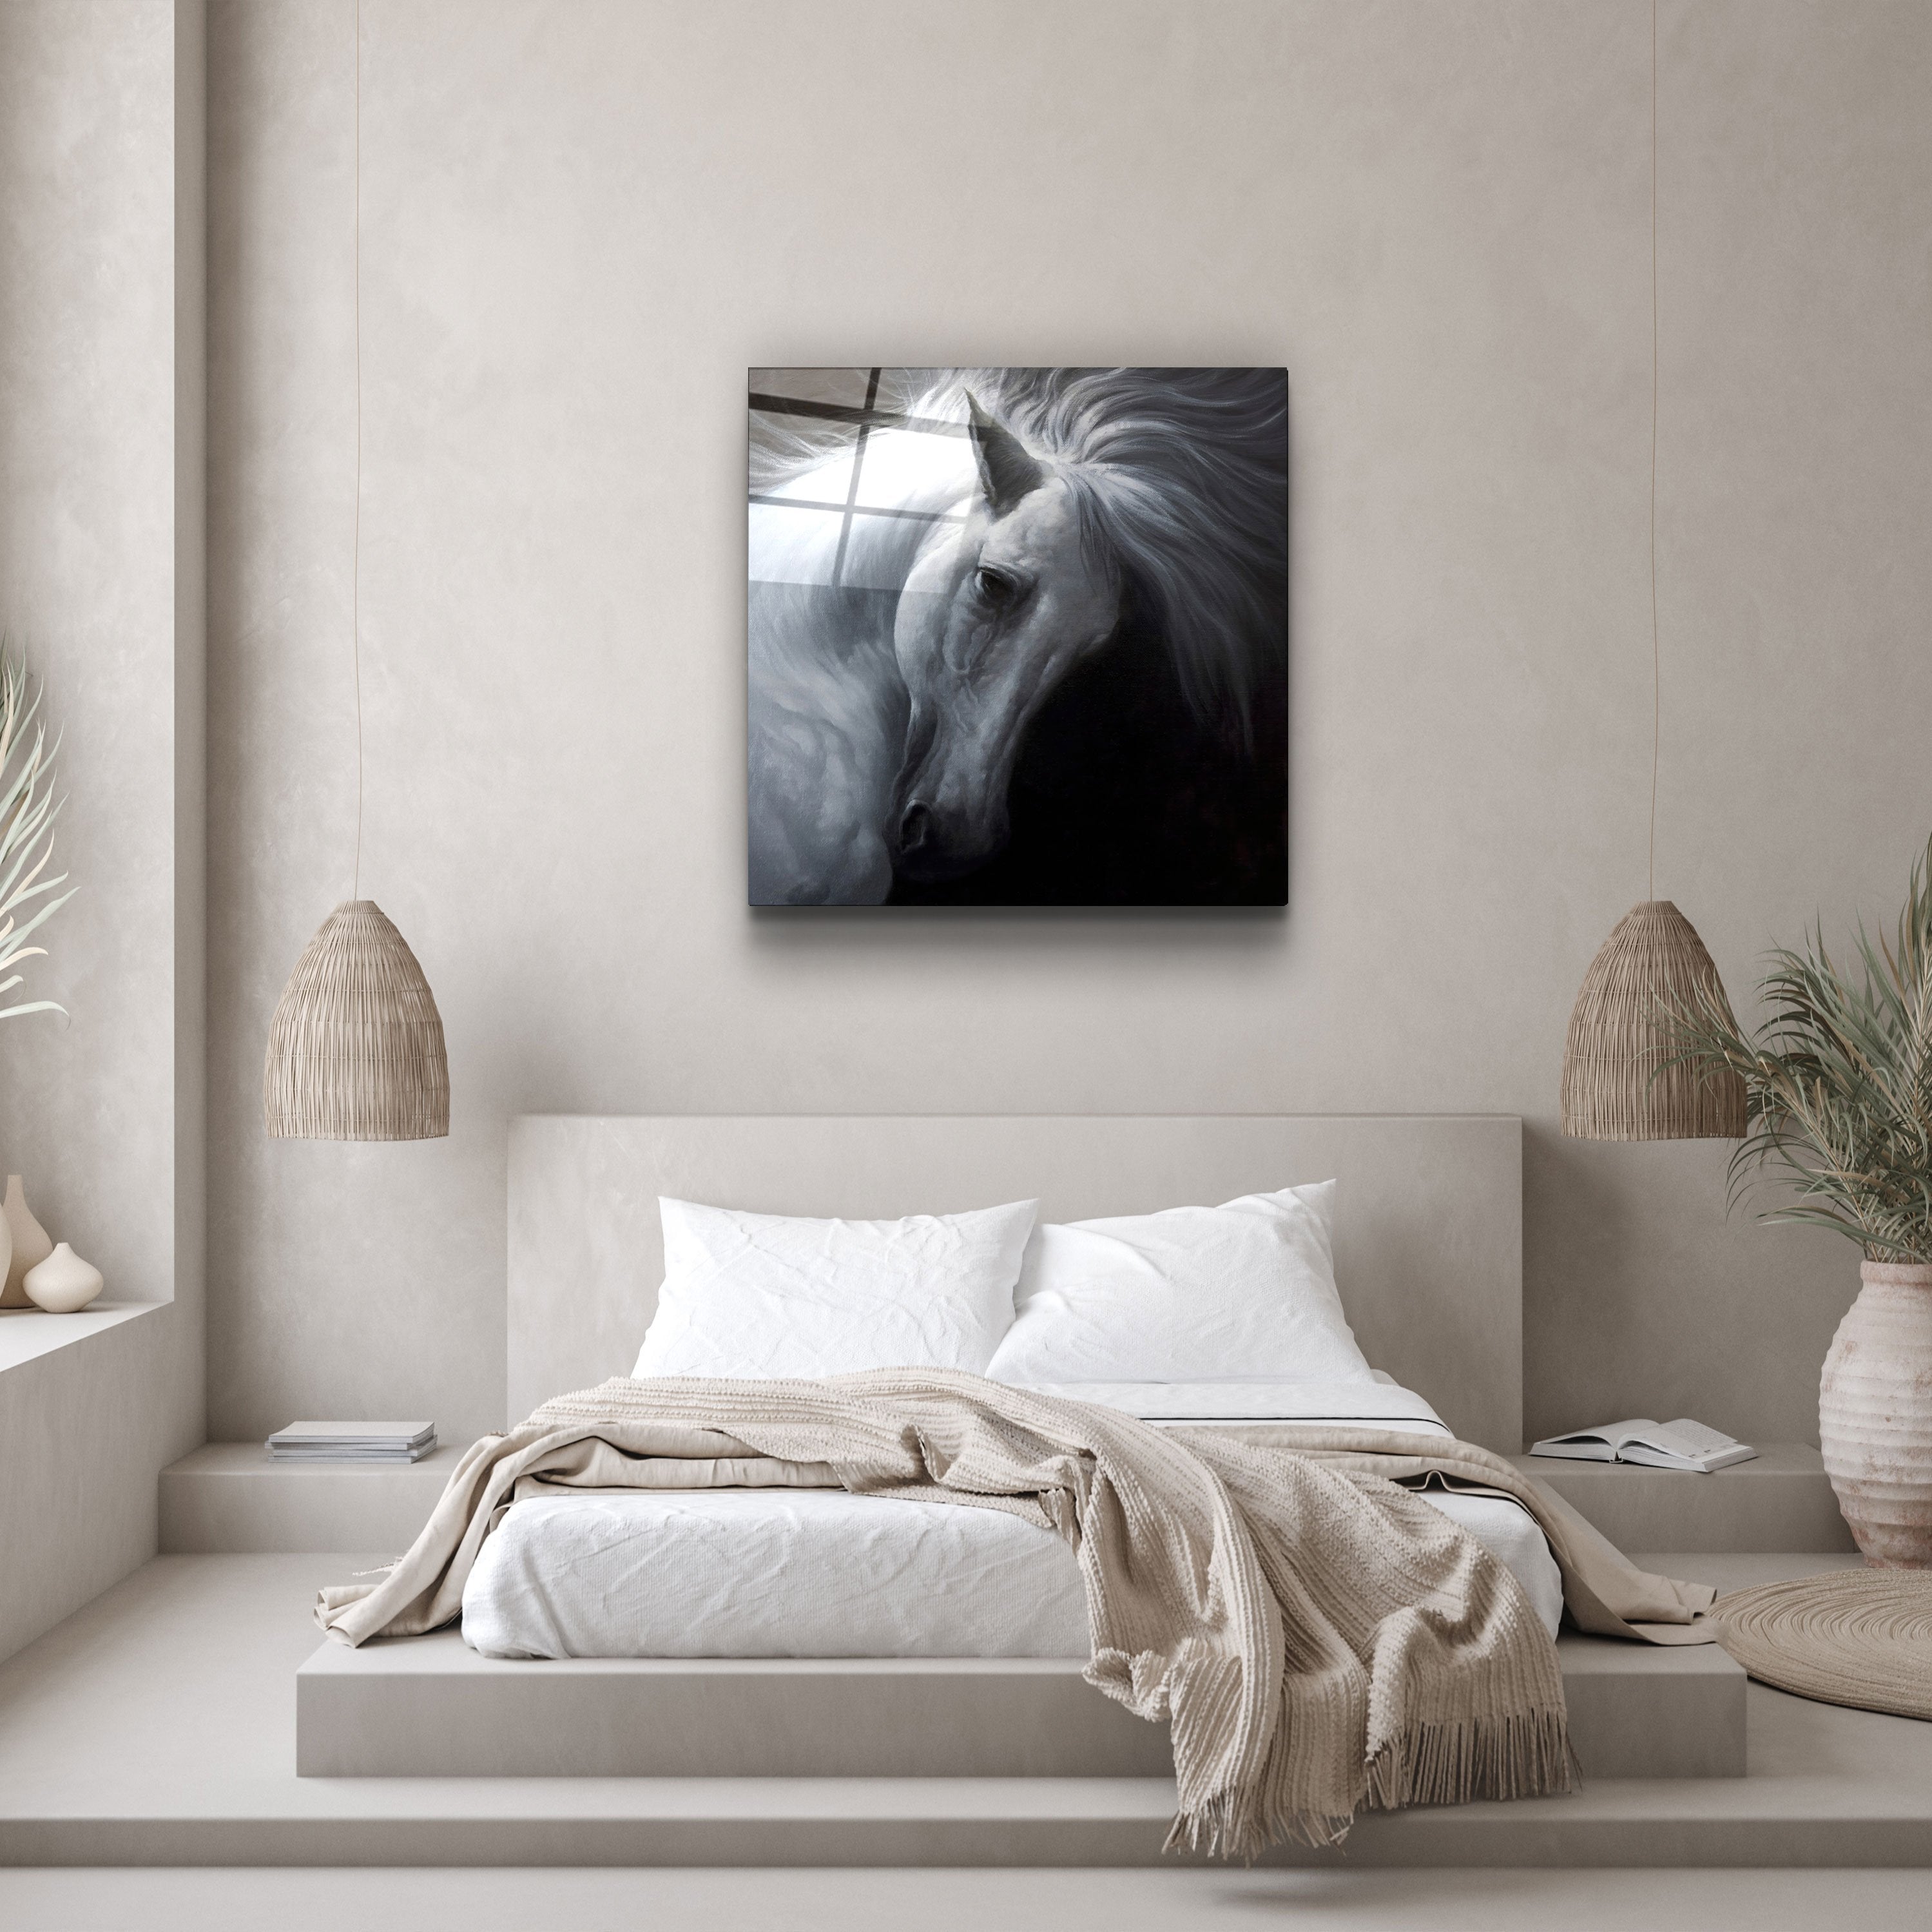 ・"Abstract White Horse"・Glass Wall Art